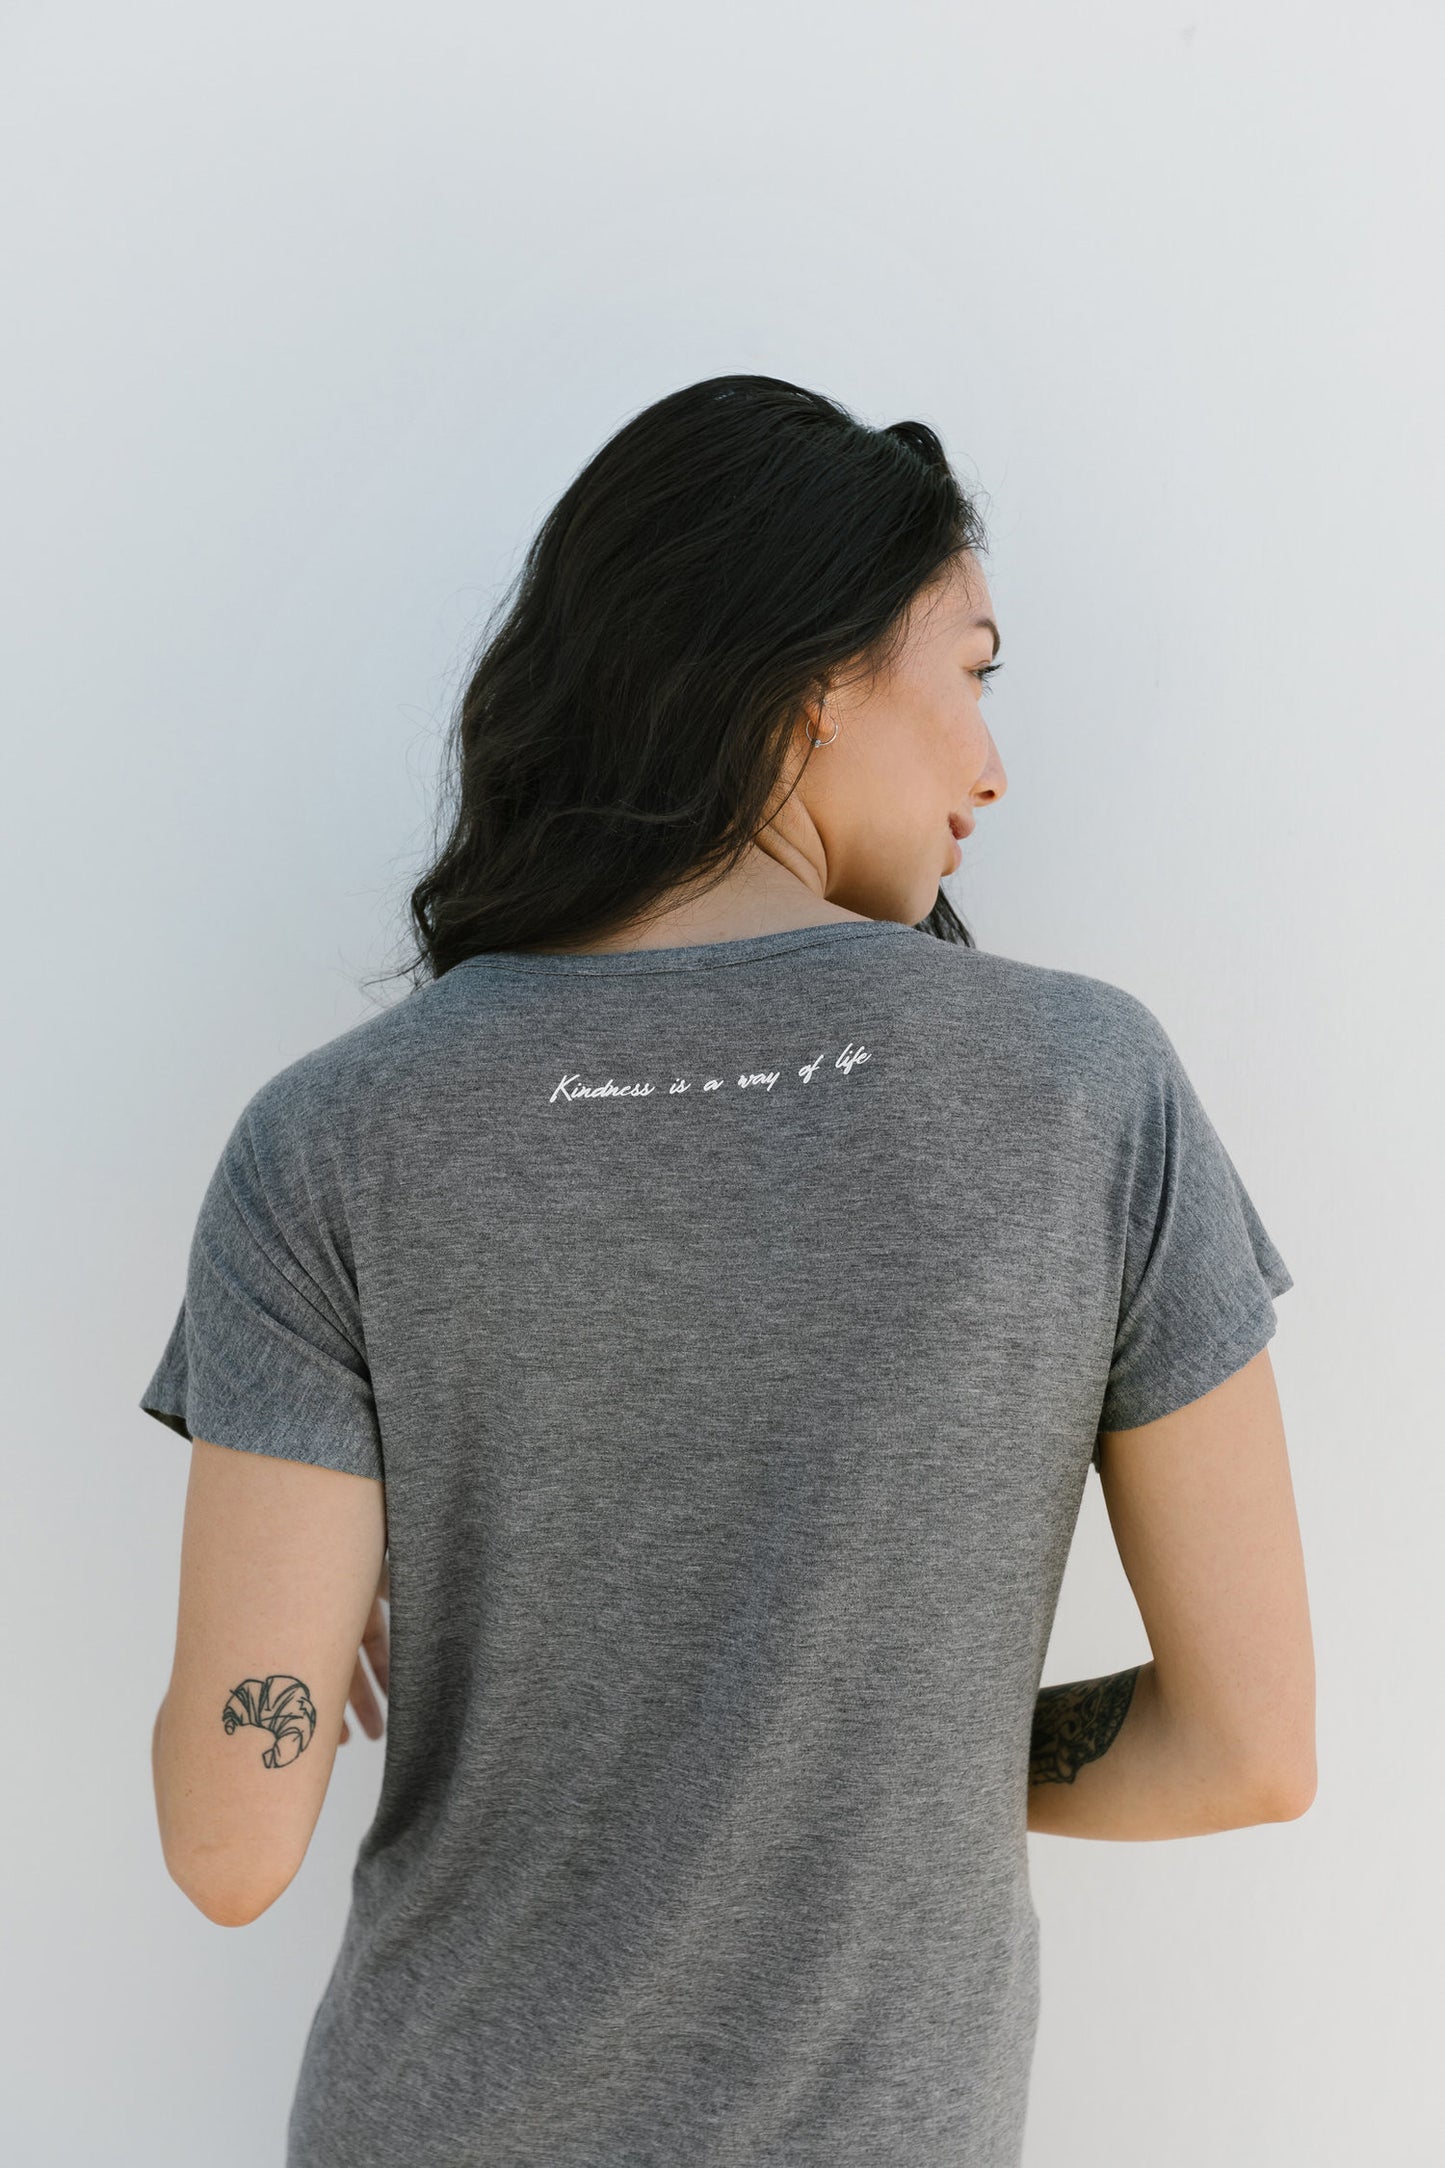 The Roster - “ Kindness Is A Way Of Life “ Grey T-Shirt